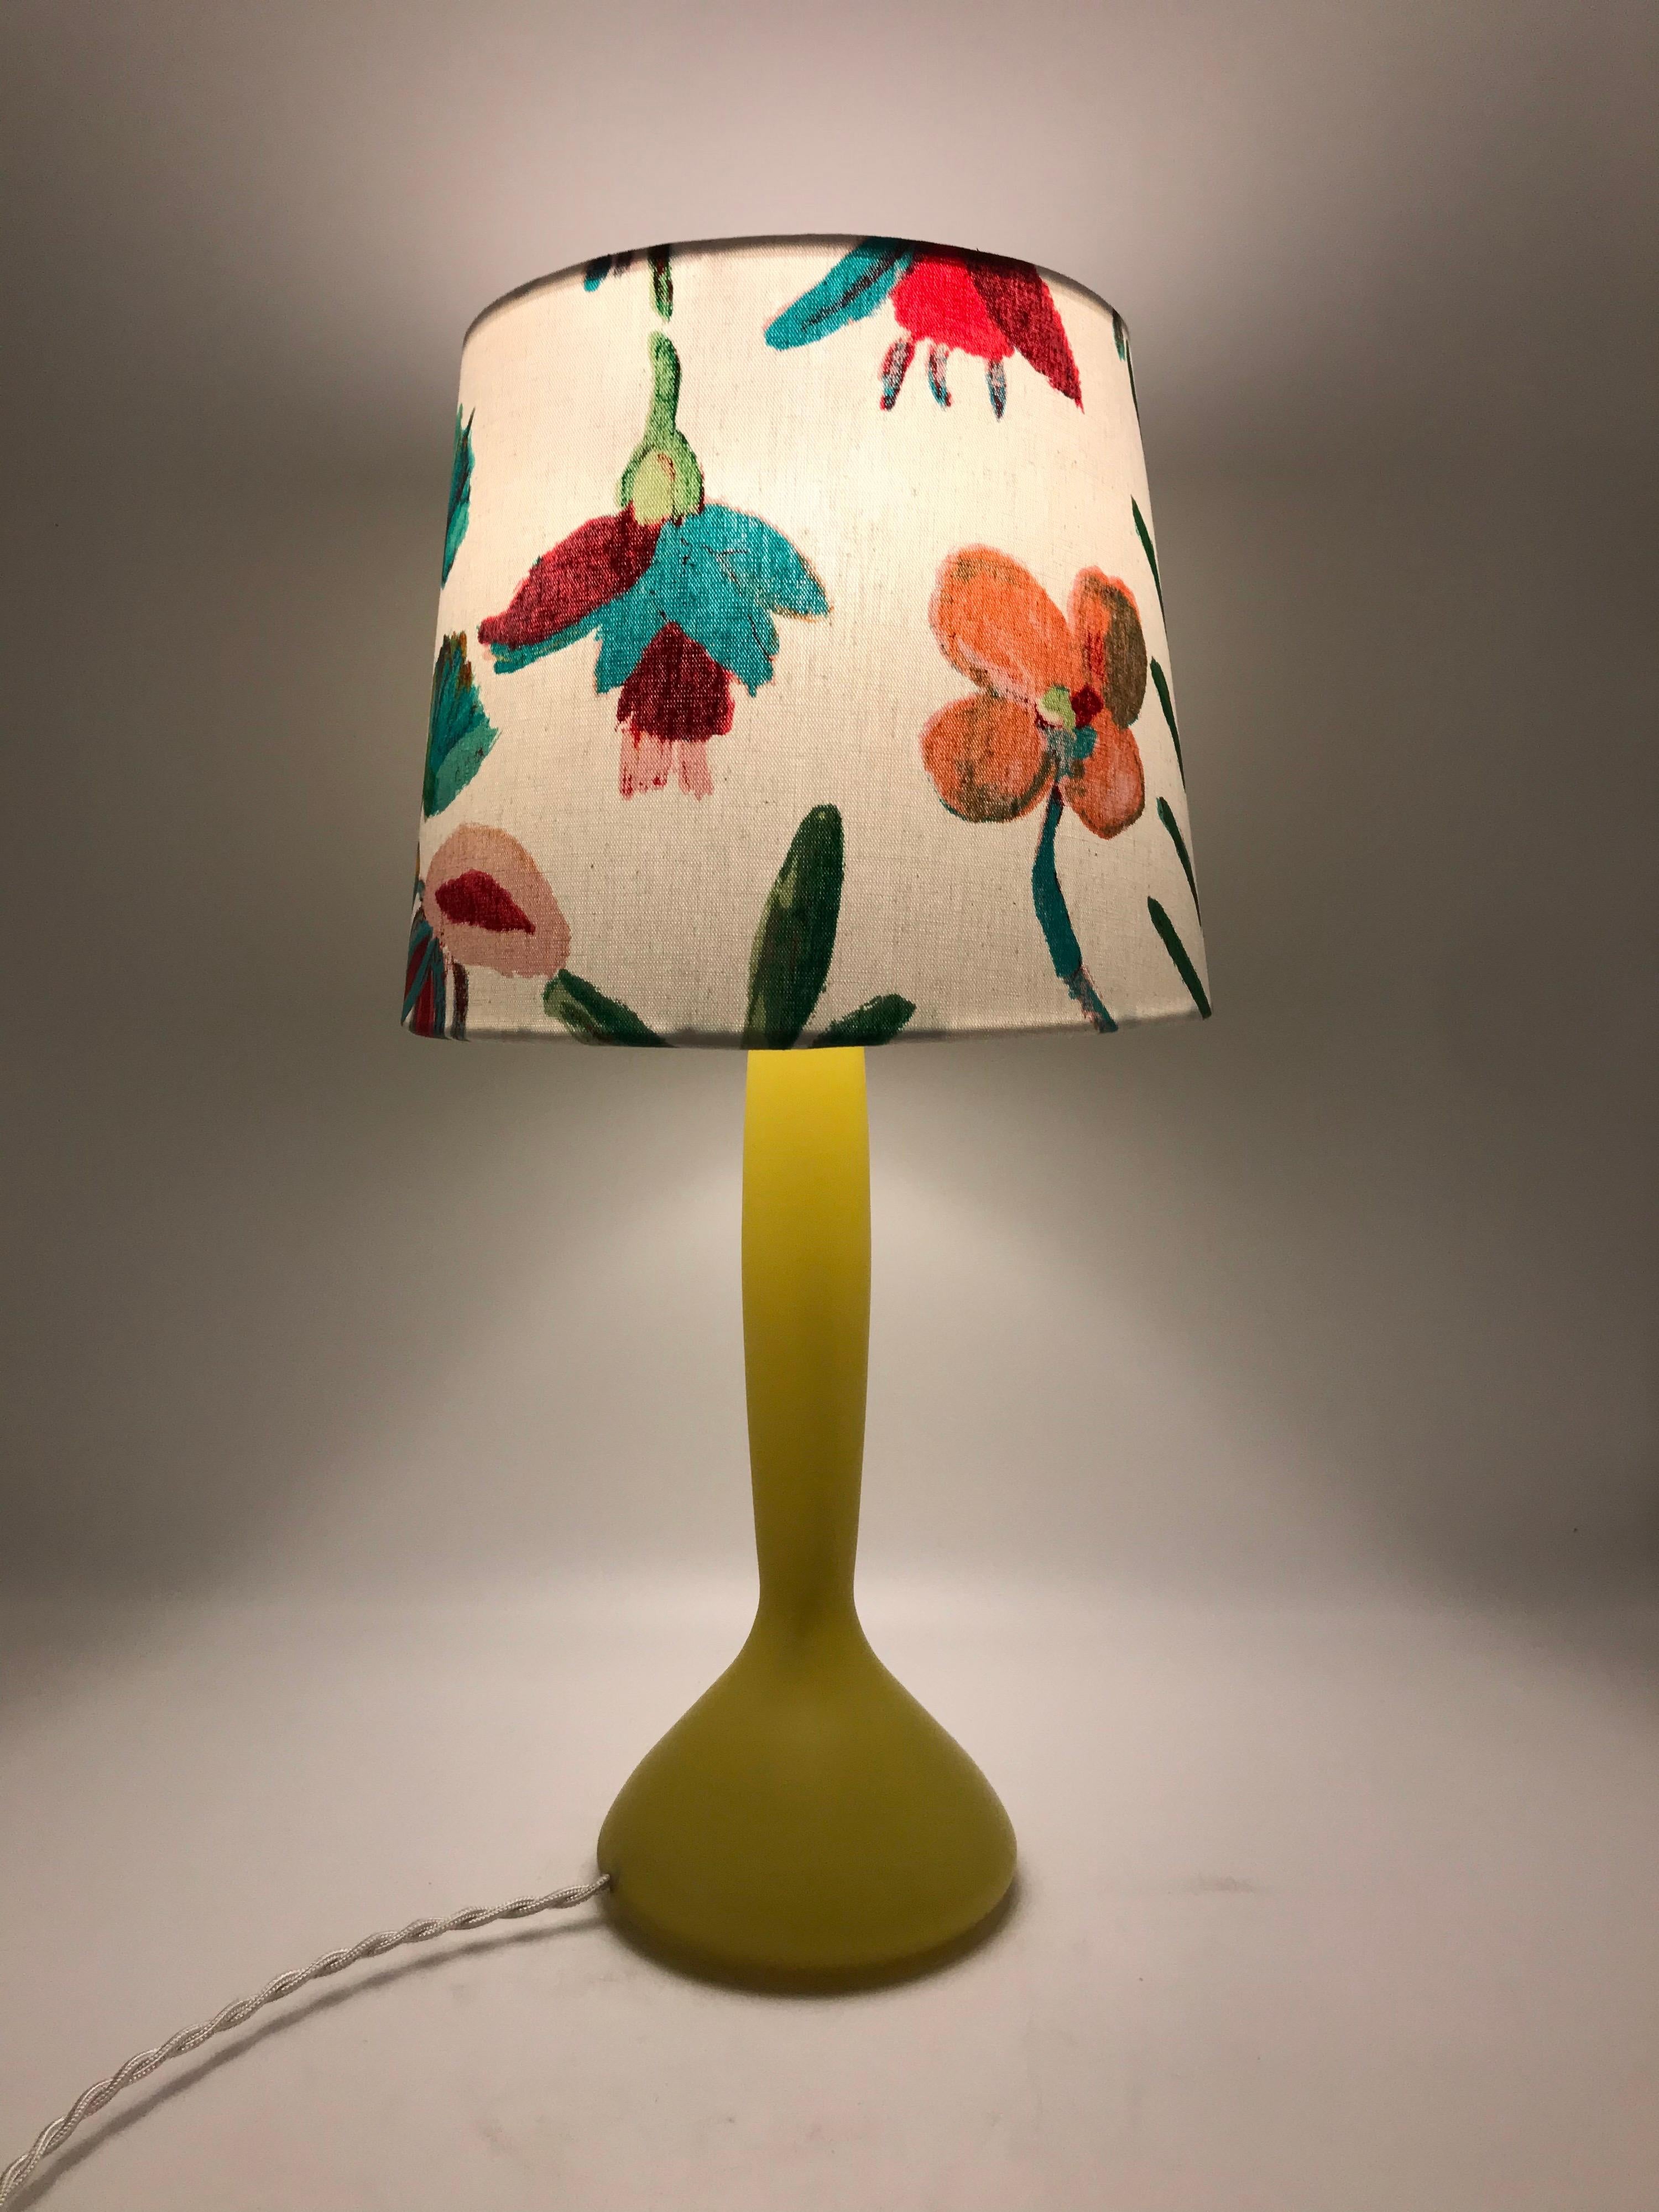 Vintage Danish table lamp by Kastrup glass for Holmegaard.
The hand blown lime green glass is in great condition with very little surface wear and it still has the Kastrup glass sticker on the base.
The lamp is rewired and can be delivered with an